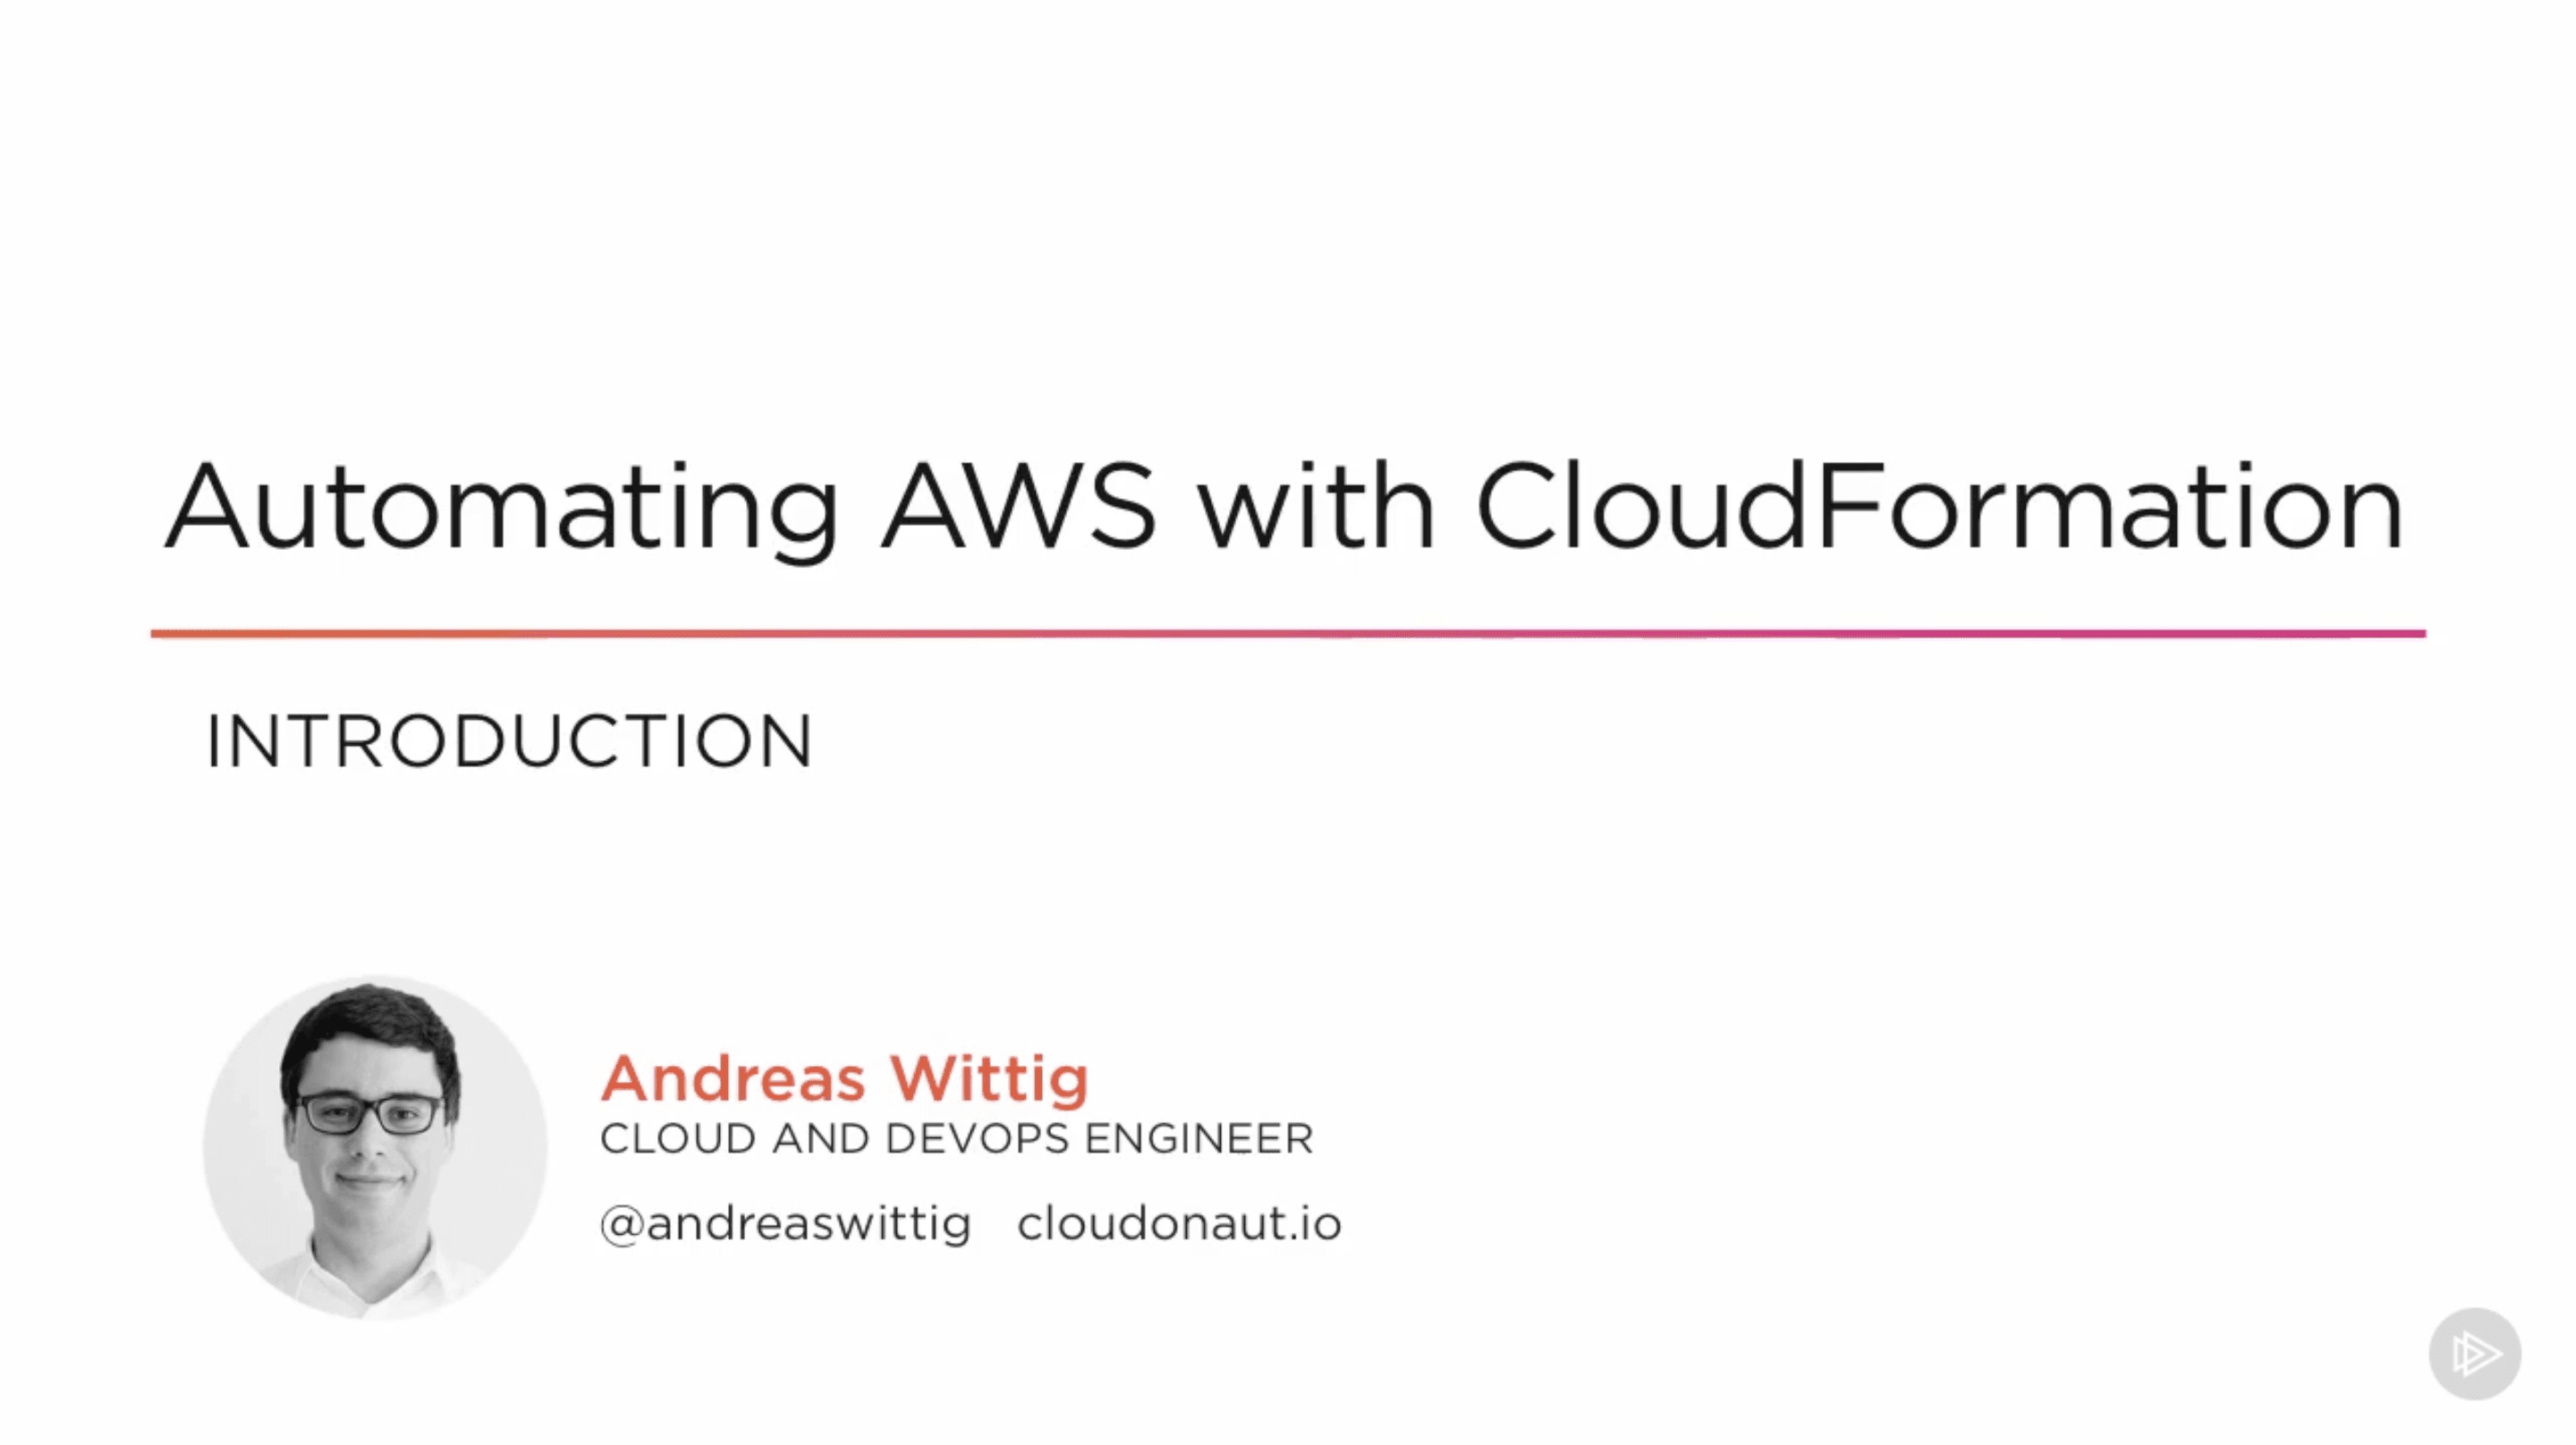 Automating AWS with CloudFormation